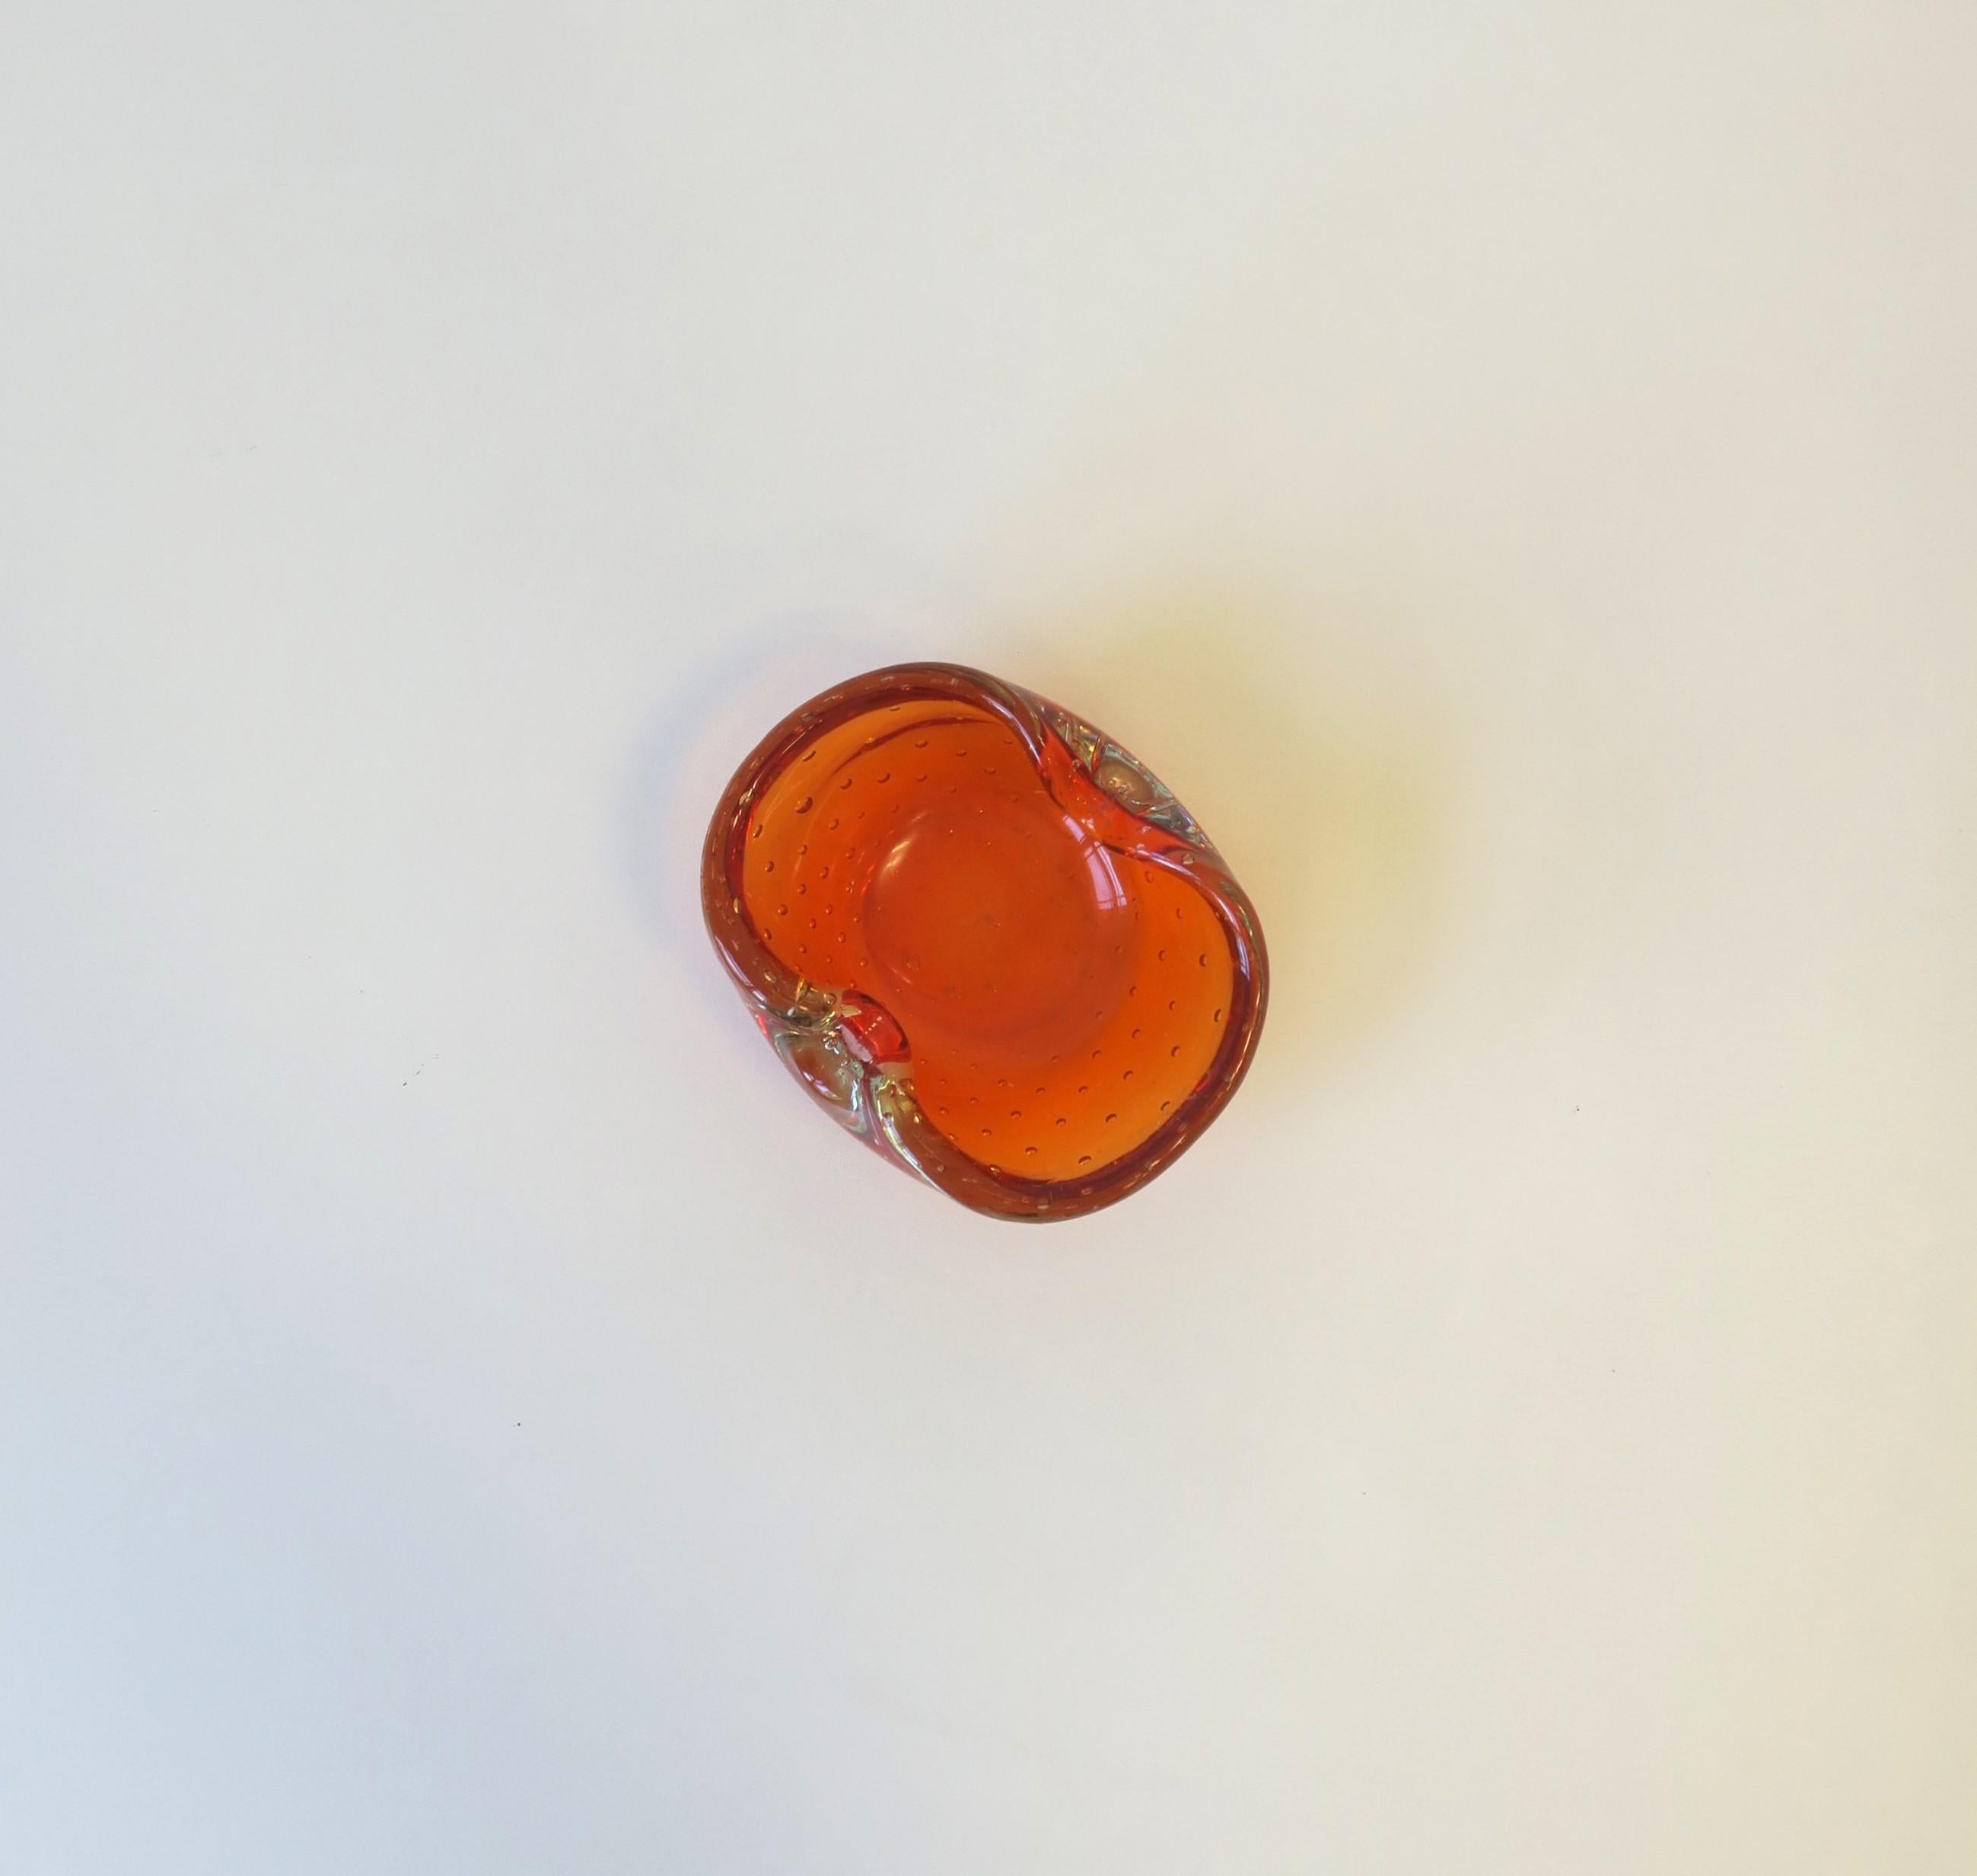 A vintage Italian Murano orange art glass bowl in the Venini Seguso style, circa mid-20th century, Italy. Piece is a juicy orange hue with a controlled bubble 'bullicante' design. Great as a standalone piece, to hold jewelry on a vanity, office